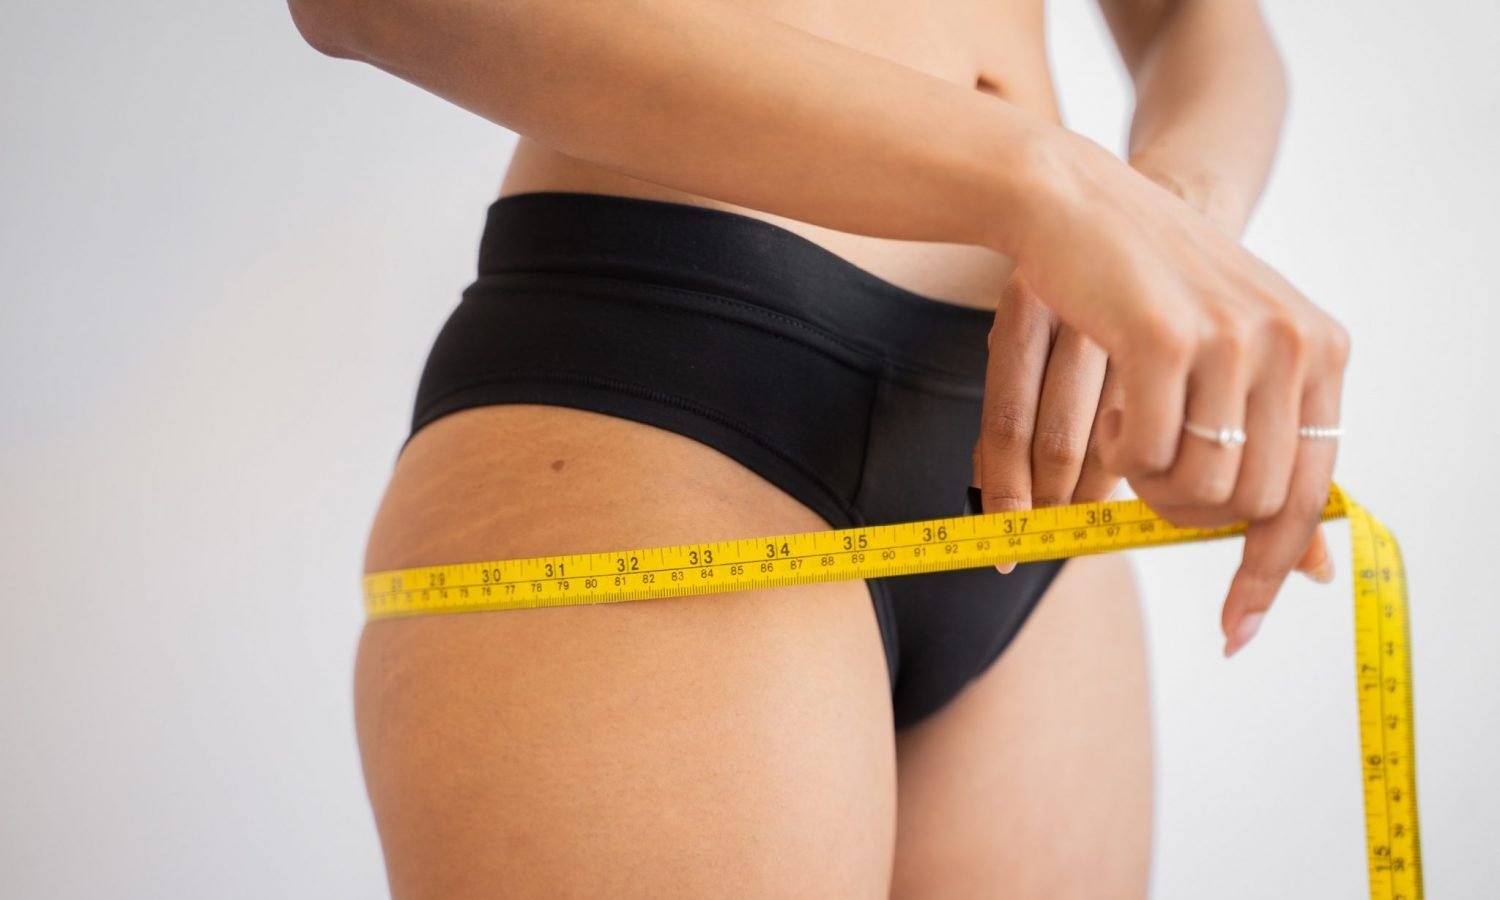 Significant Weight Loss Might Have An Impact On Your Immune System